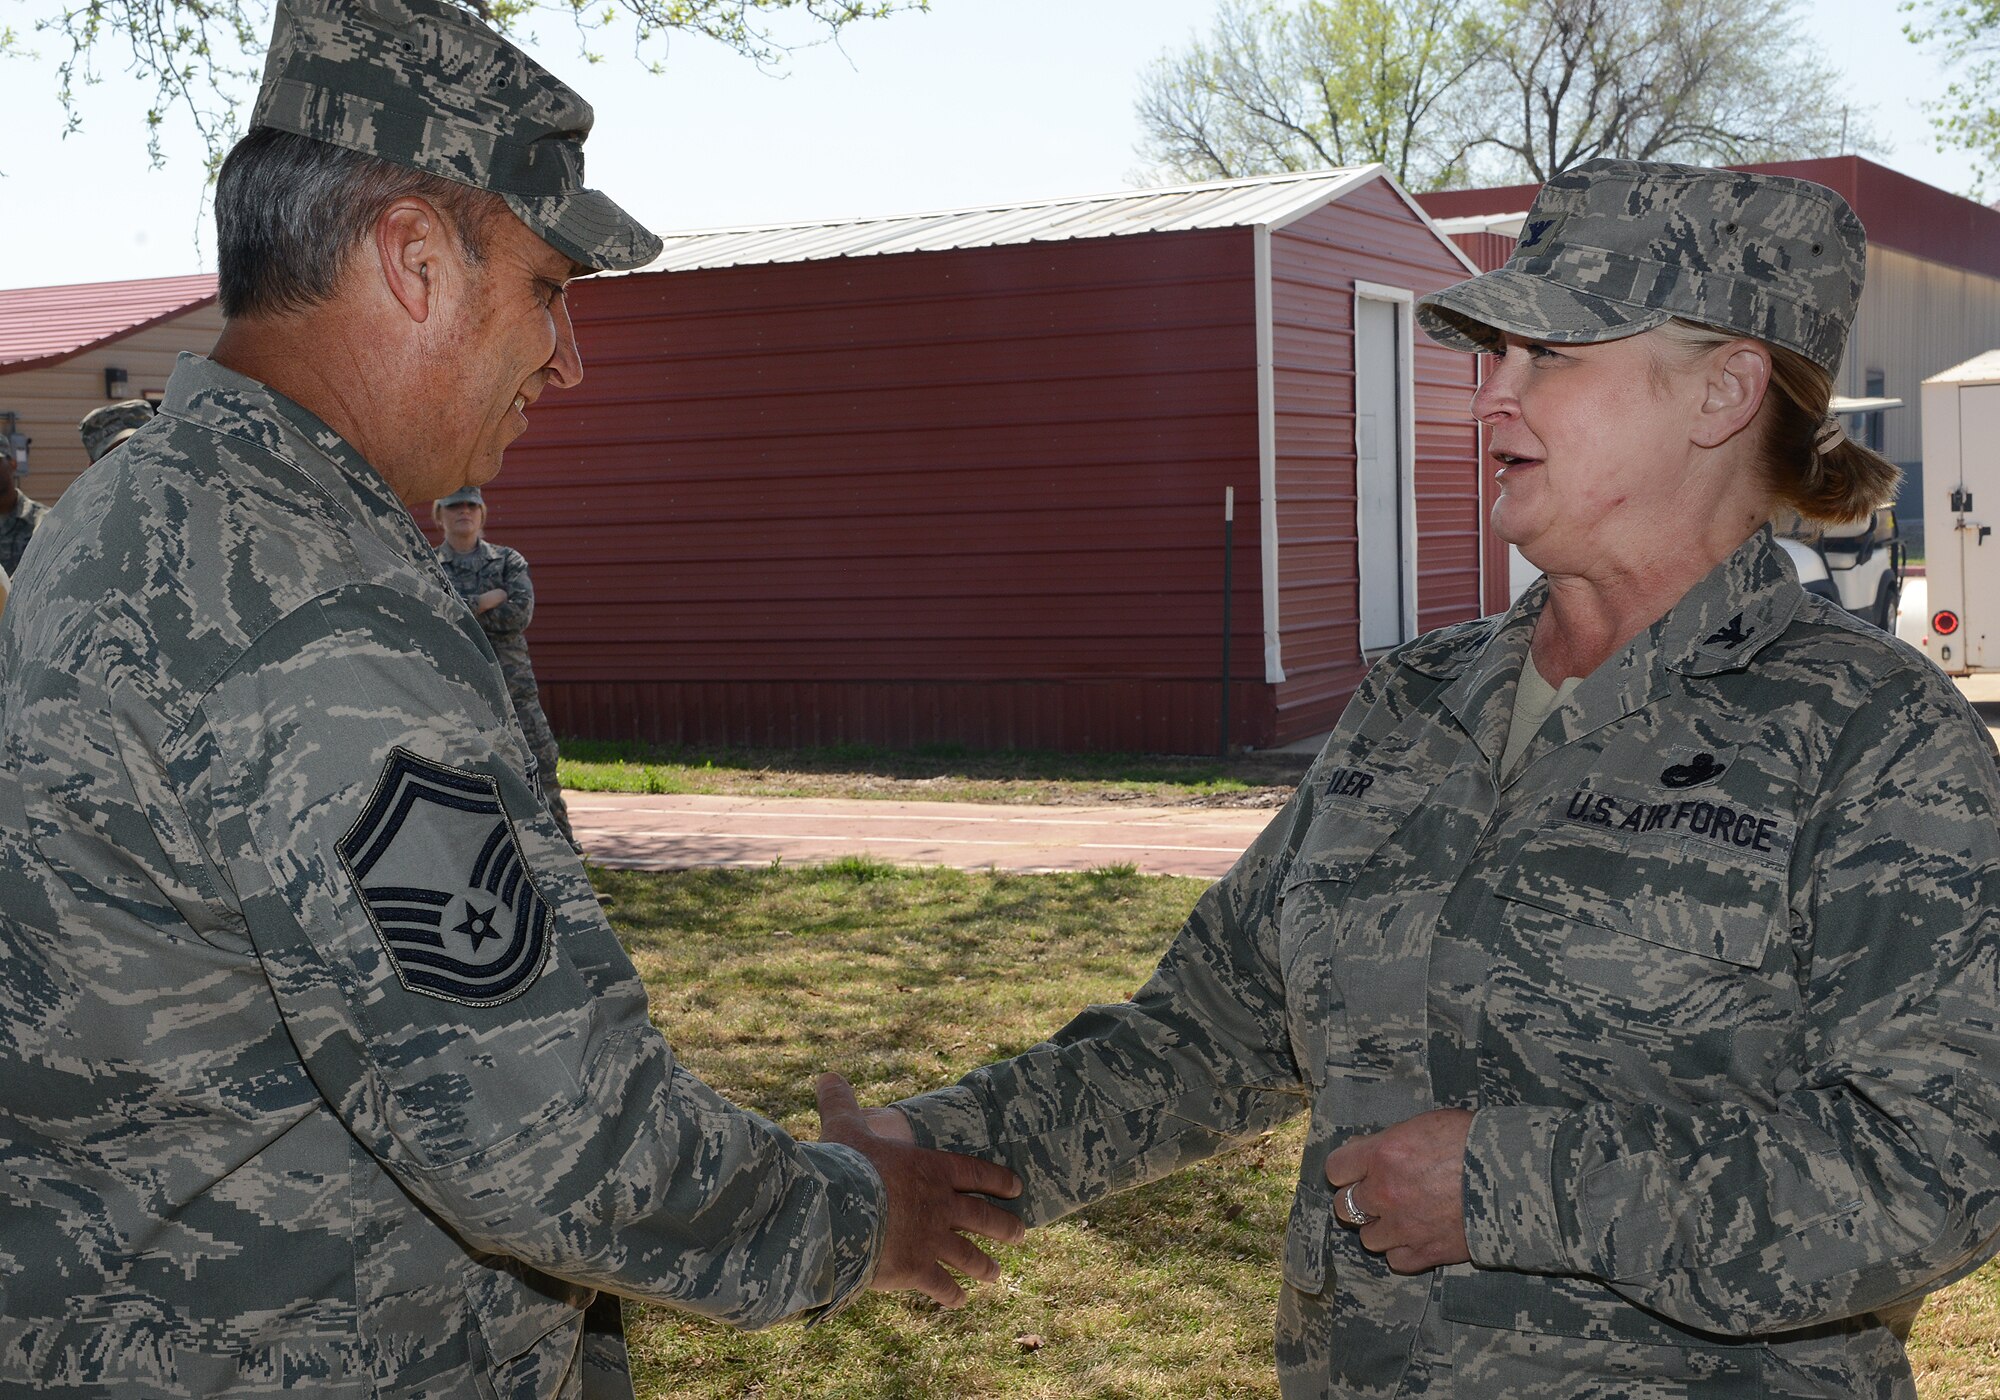 Colonel Rita Miller, 138th Mission Support Group Commander, recognizes Senior Master Sergeant Shawn Strohmeyer for his ESOHCAMP preparation efforts during an Earth Day celebration at the 138th Fighter Wing, 22 April 2014.  The 138th FW Environmental Management office organized a cookout and other green activities to celebrate the day at the Tulsa Air National Guard base, Tulsa Okla.  (U.S. National Guard photo by Senior Master Sgt.  Preston L. Chasteen/Released)